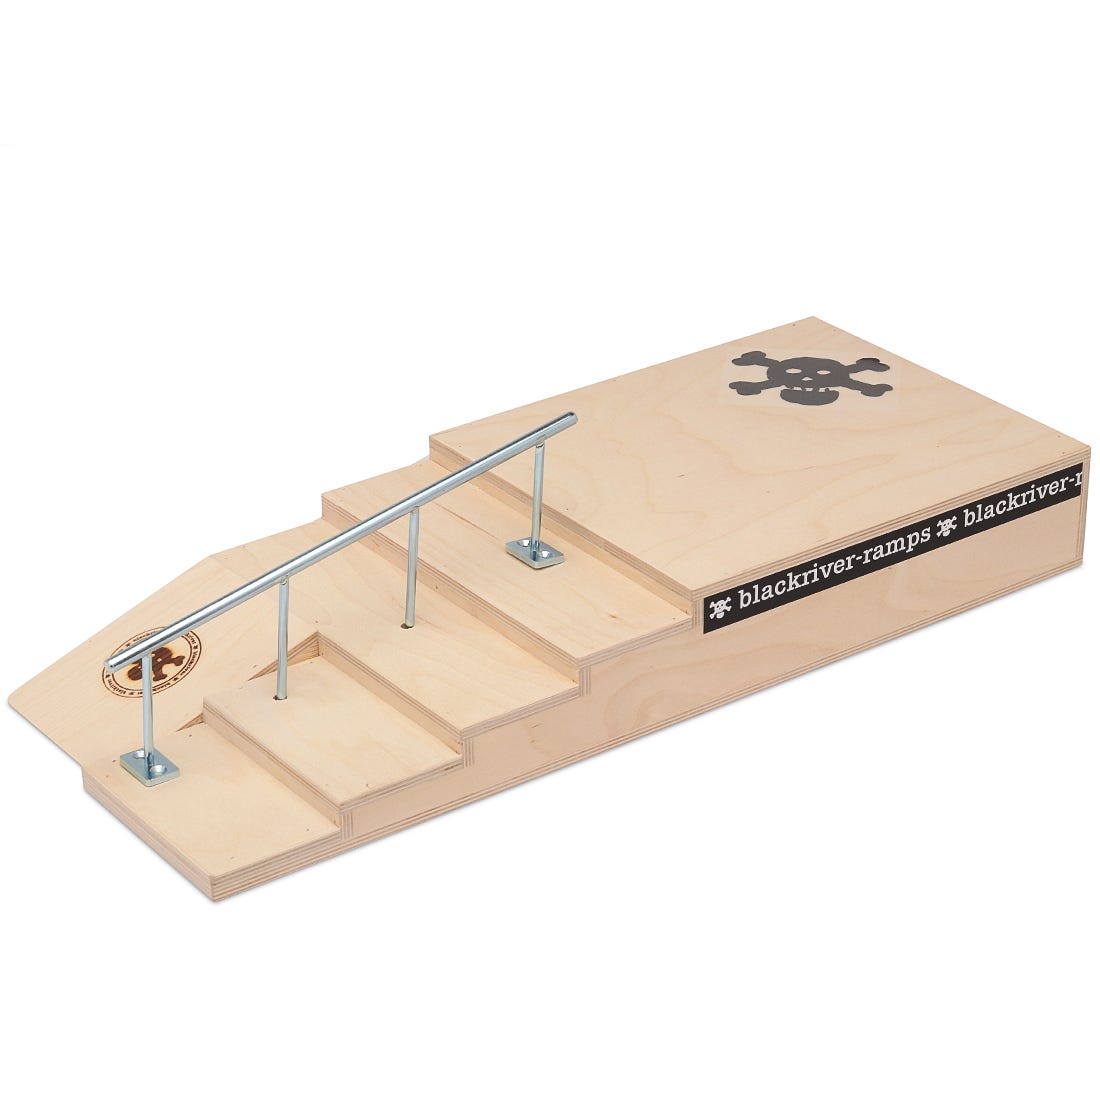 Blackriver Fingerboard Ramps - Stairset With Round Rail